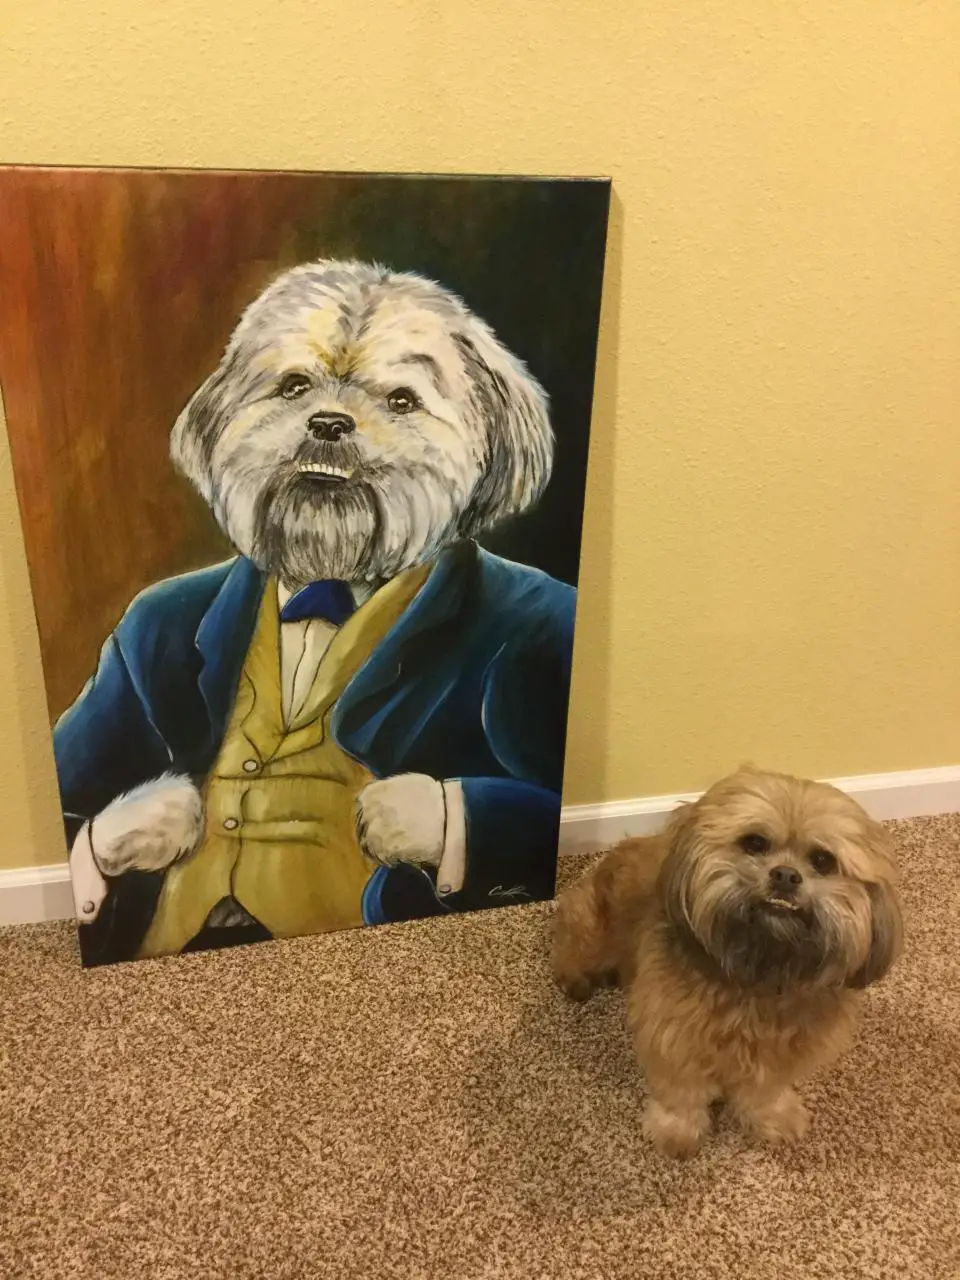 I asked a local artist to do a painting of my dog.